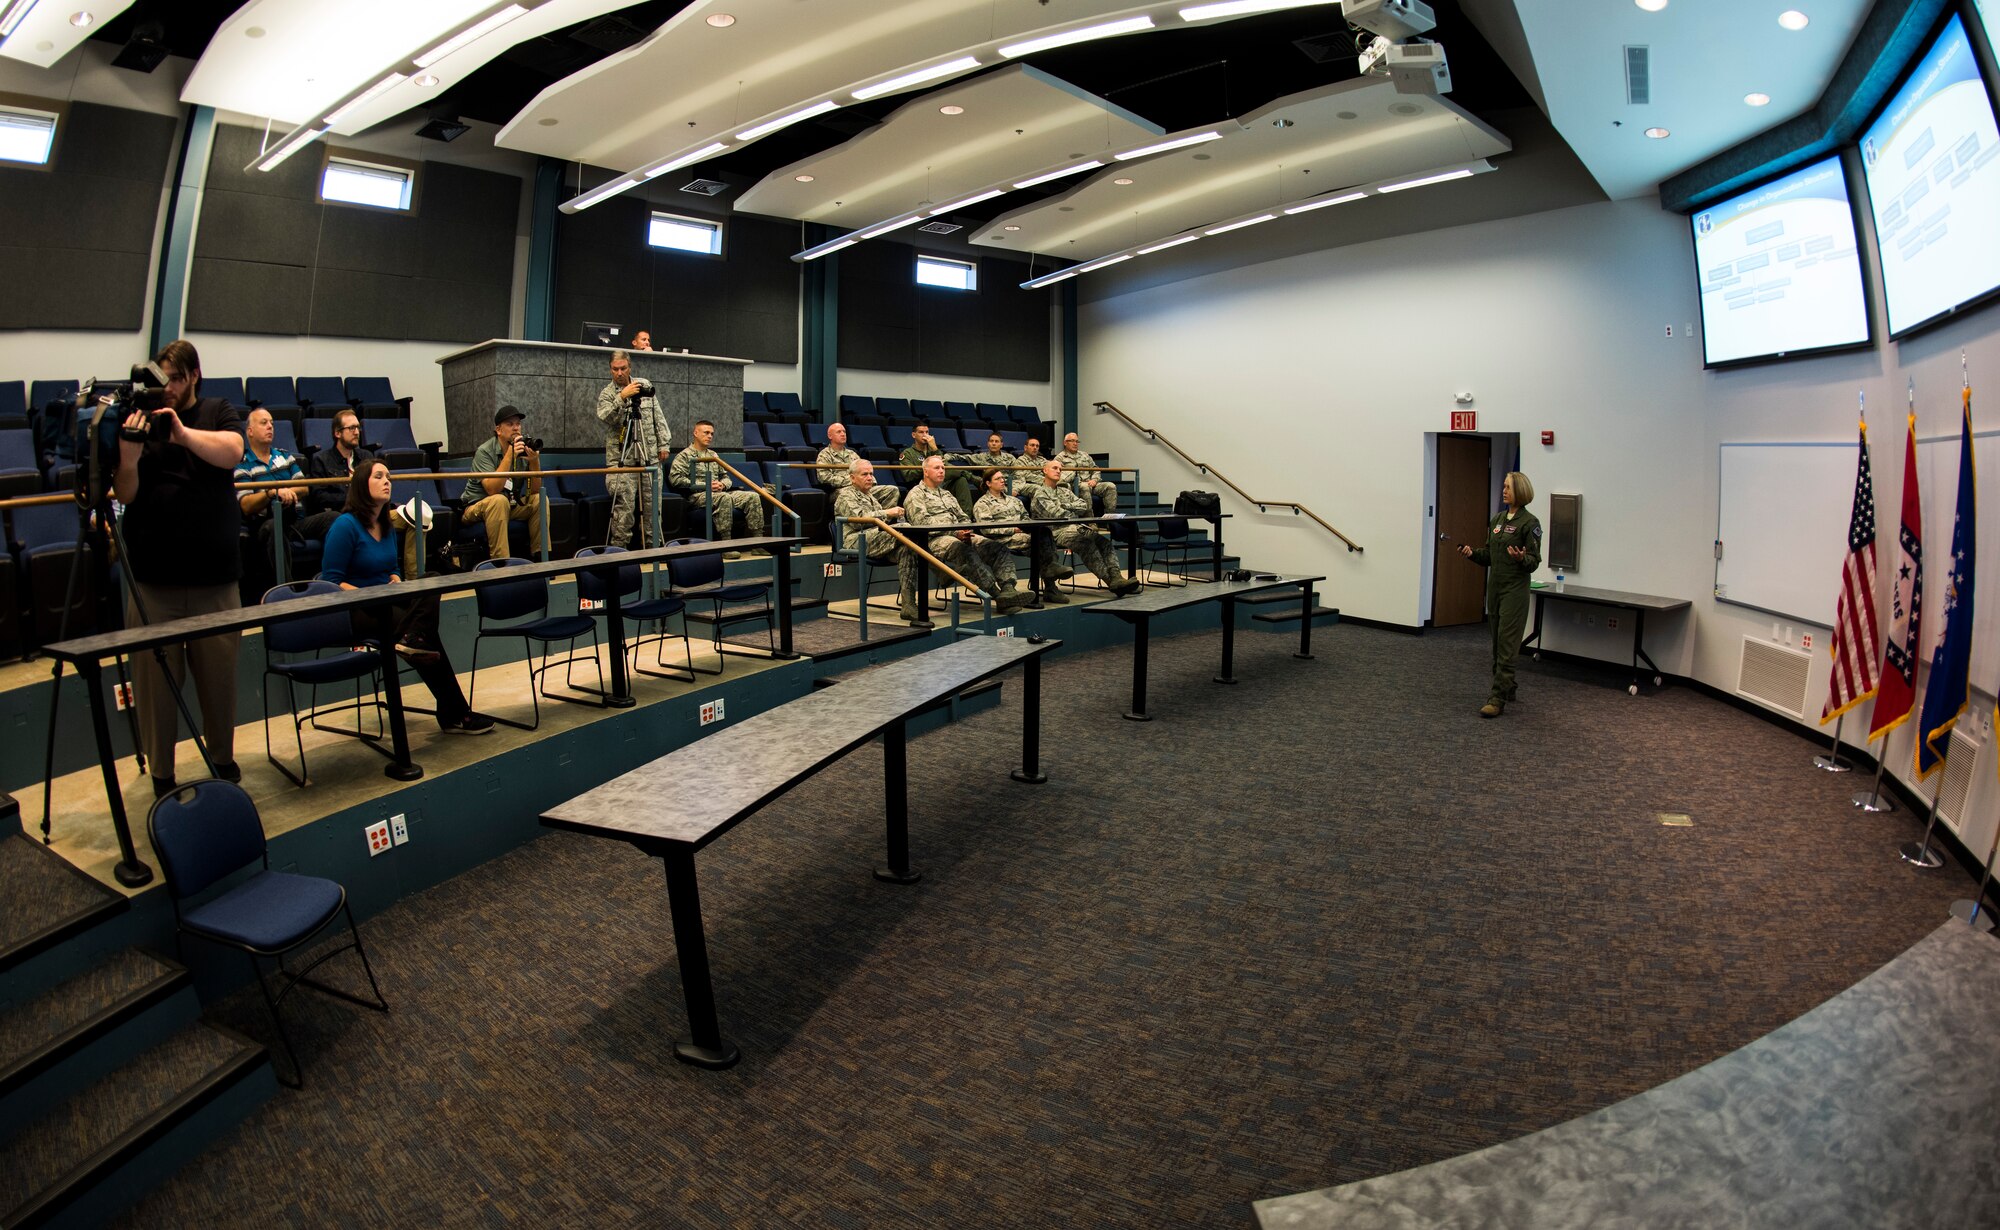 Col. Bobbi Doorenbos, 188th Wing commander, announces the activation of the wing’s remotely piloted aircraft, intelligence analysis and targeting missions to members of the local media, Sept. 29, 2016, at Ebbing Air National Guard Base, Fort Smith, Ark. In addition to the wing being operational, Doorenbos emphasized that it is also unique with its one-of-a-kind combined operations and first-of-its-kind space focused targeting mission and is now looking to hire over 100 new Airmen across the organization. (U.S. Air National Guard photo by Senior Airman Cody Martin)